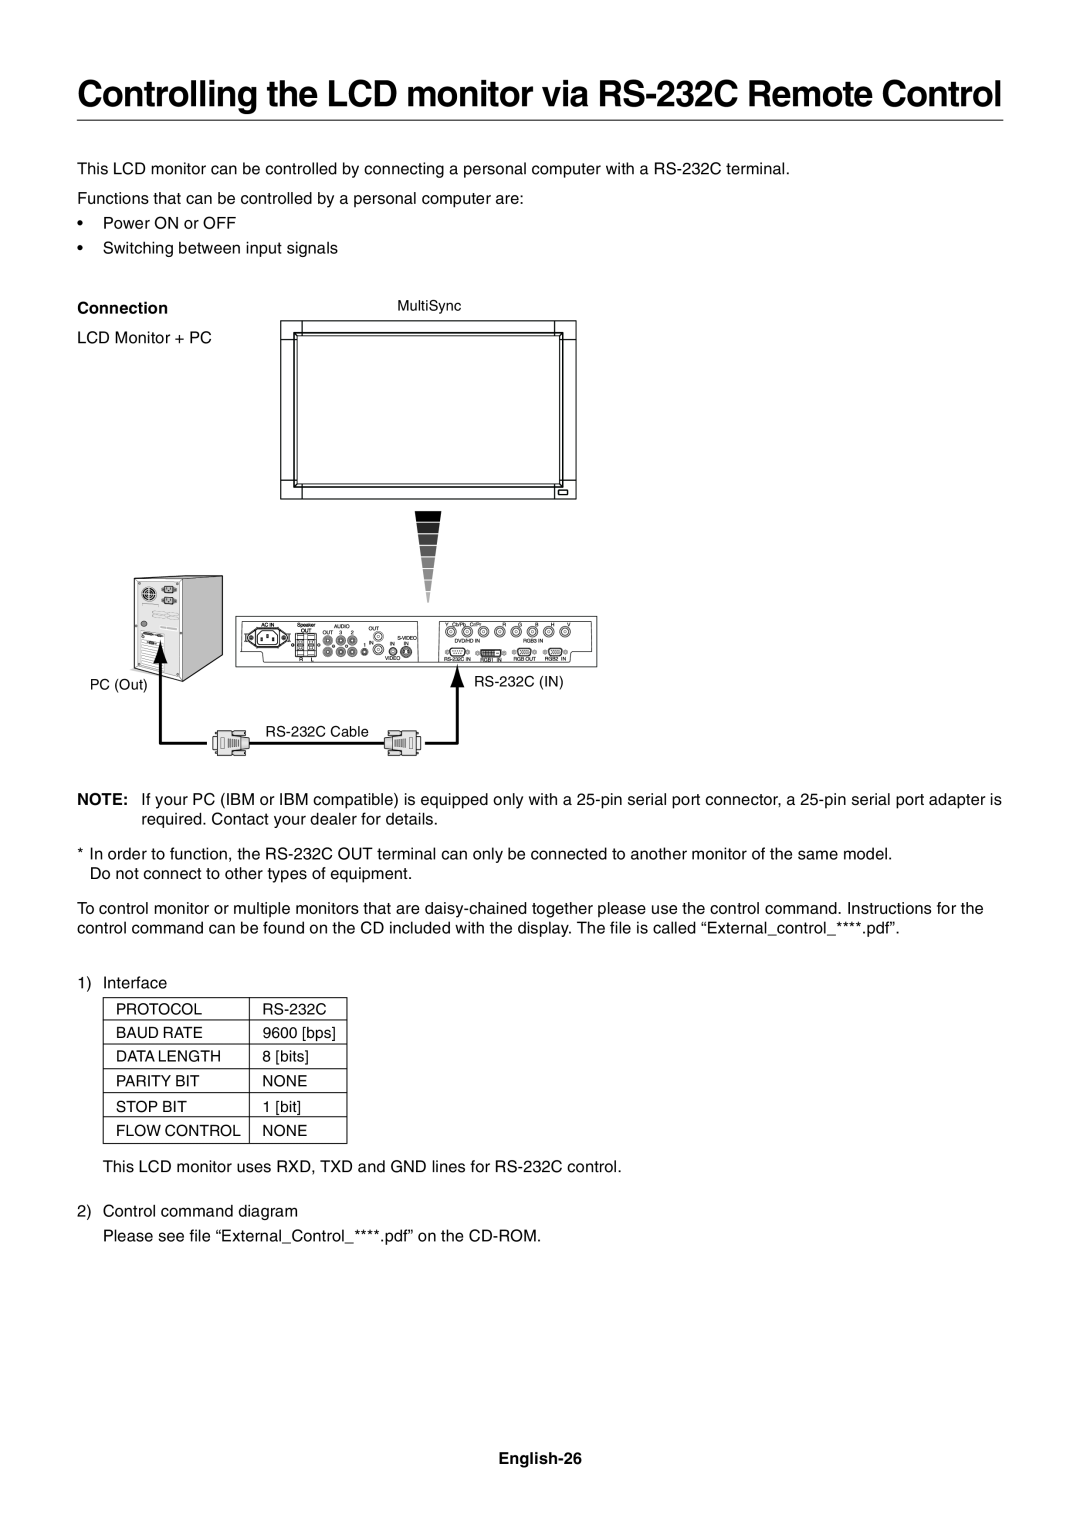 NEC LCD4615 user manual Controlling the LCD monitor via RS-232C Remote Control, Connection, English-26 